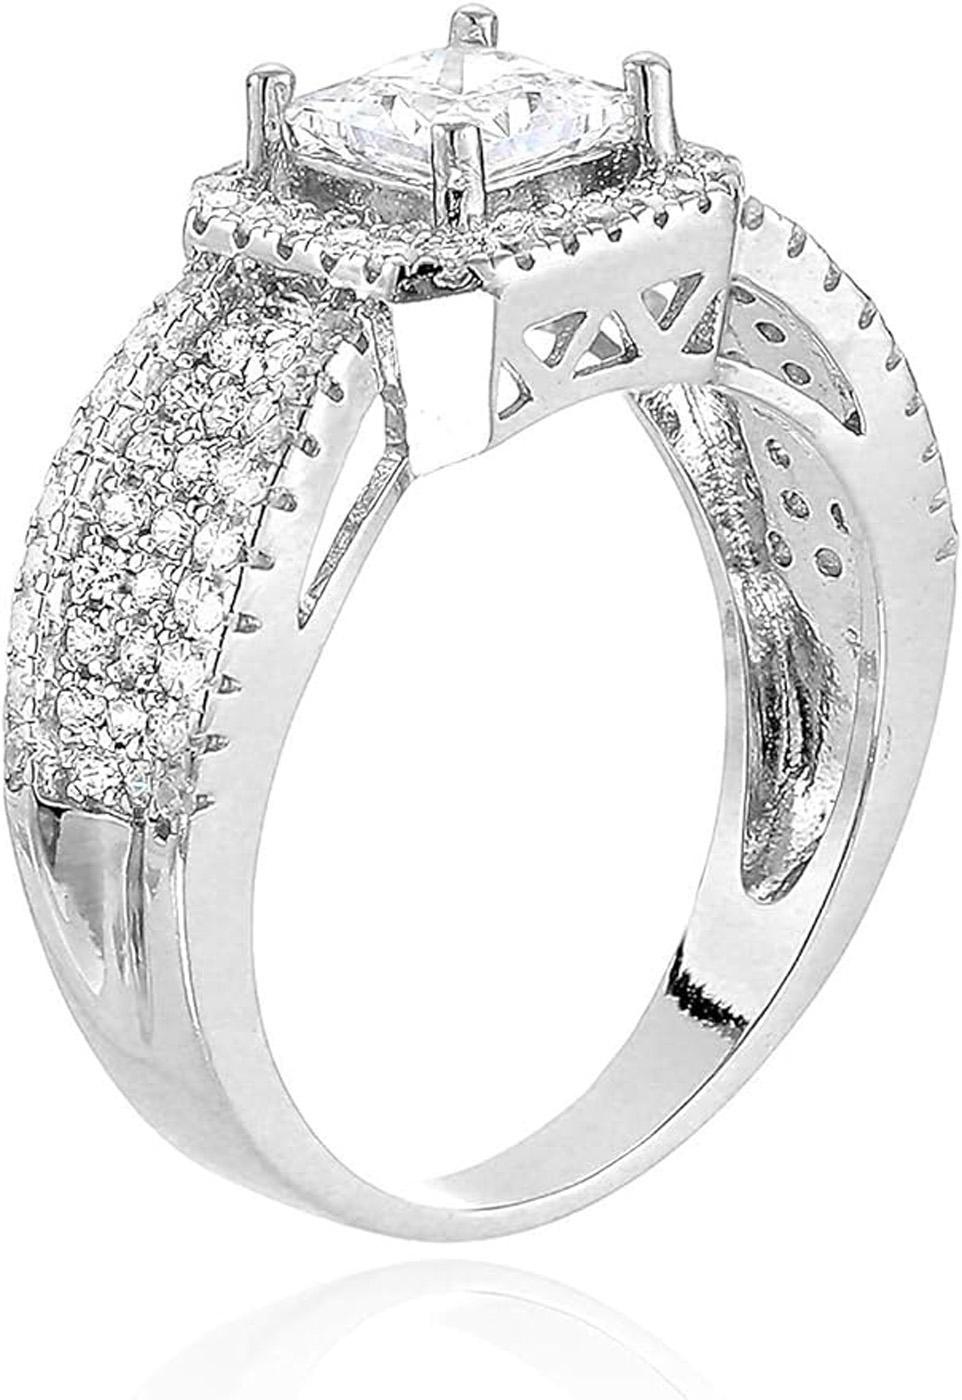 Decadence Sterling SIlver 5mm Princess Cut Engagement Ring With Indented PAve Band Size 9